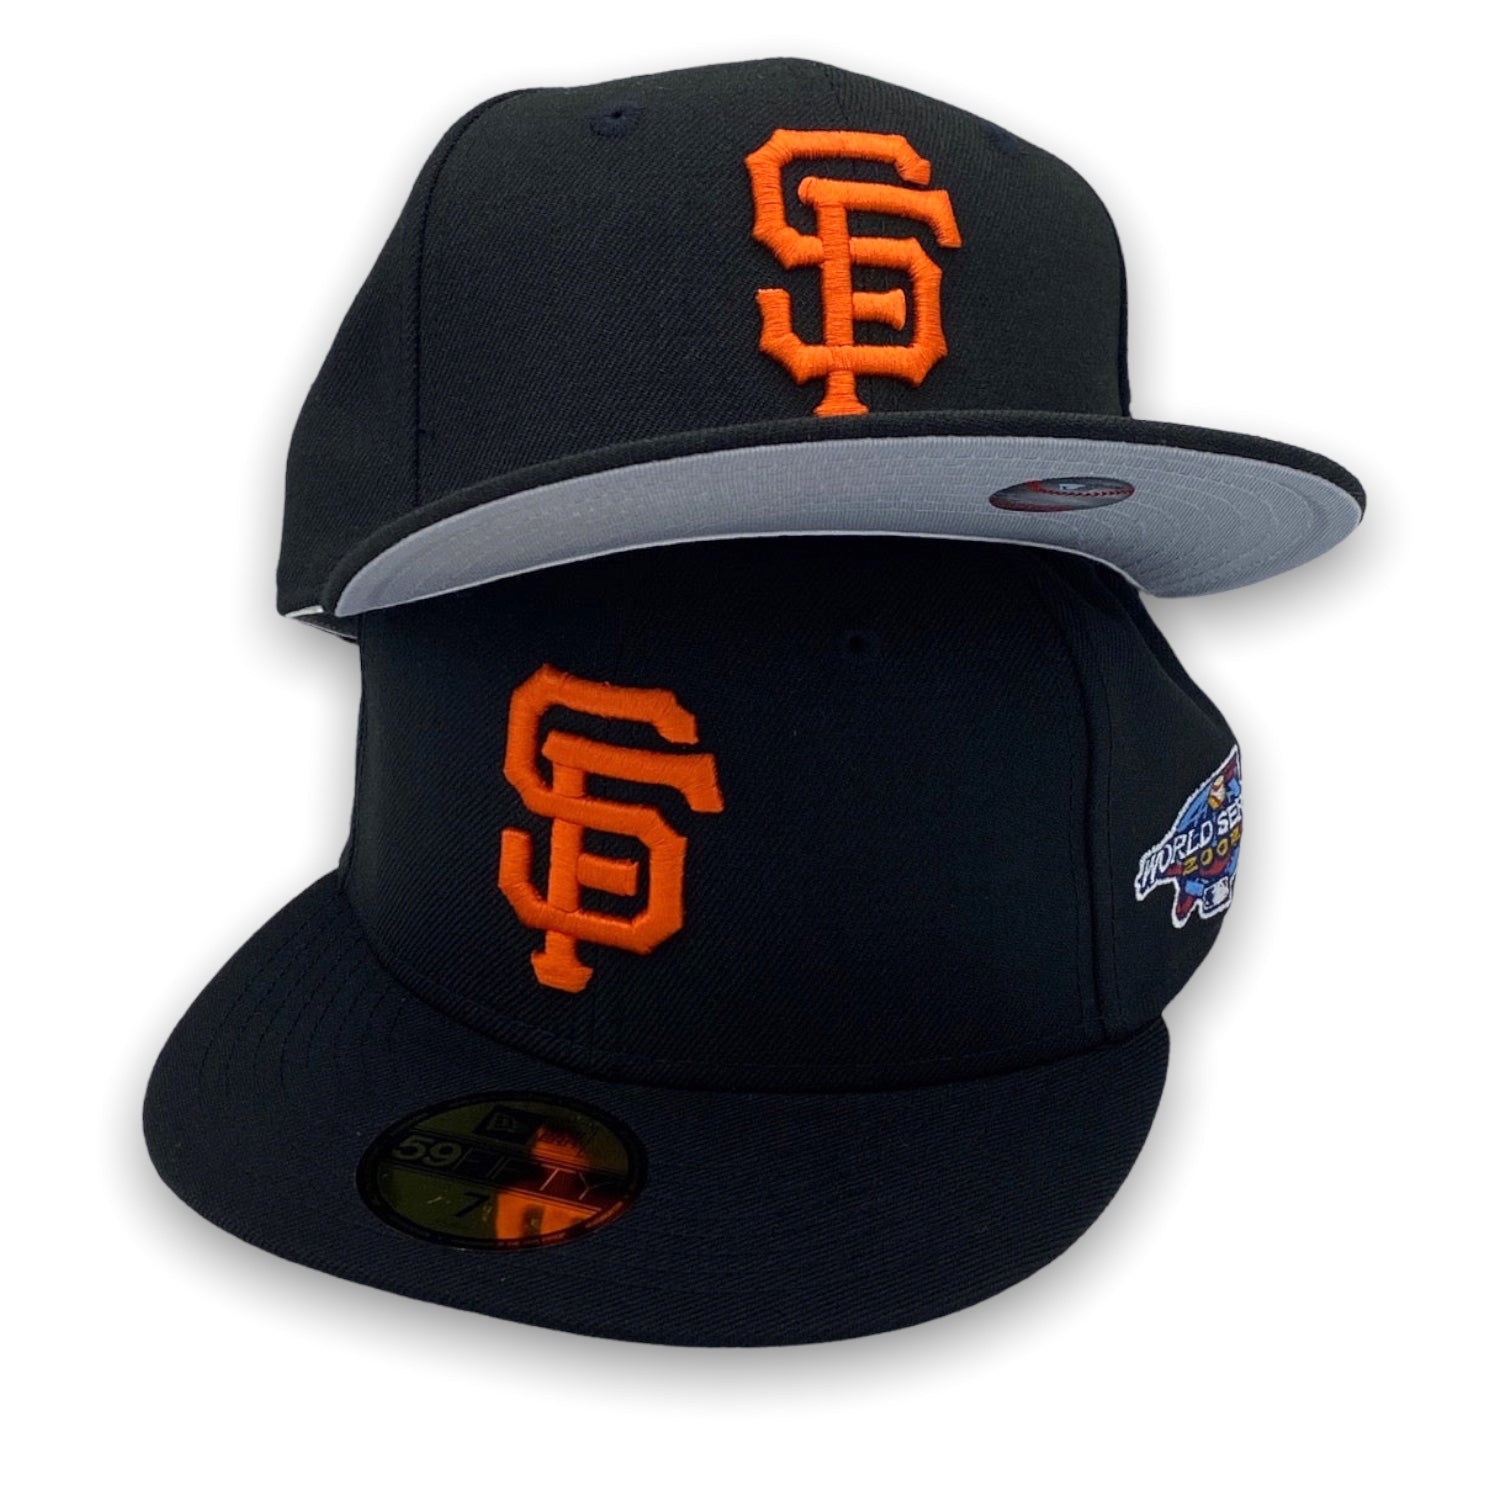 San Francisco Giants Citrus Pop 59FIFTY Fitted Hat, Black - Size: 7, by New Era